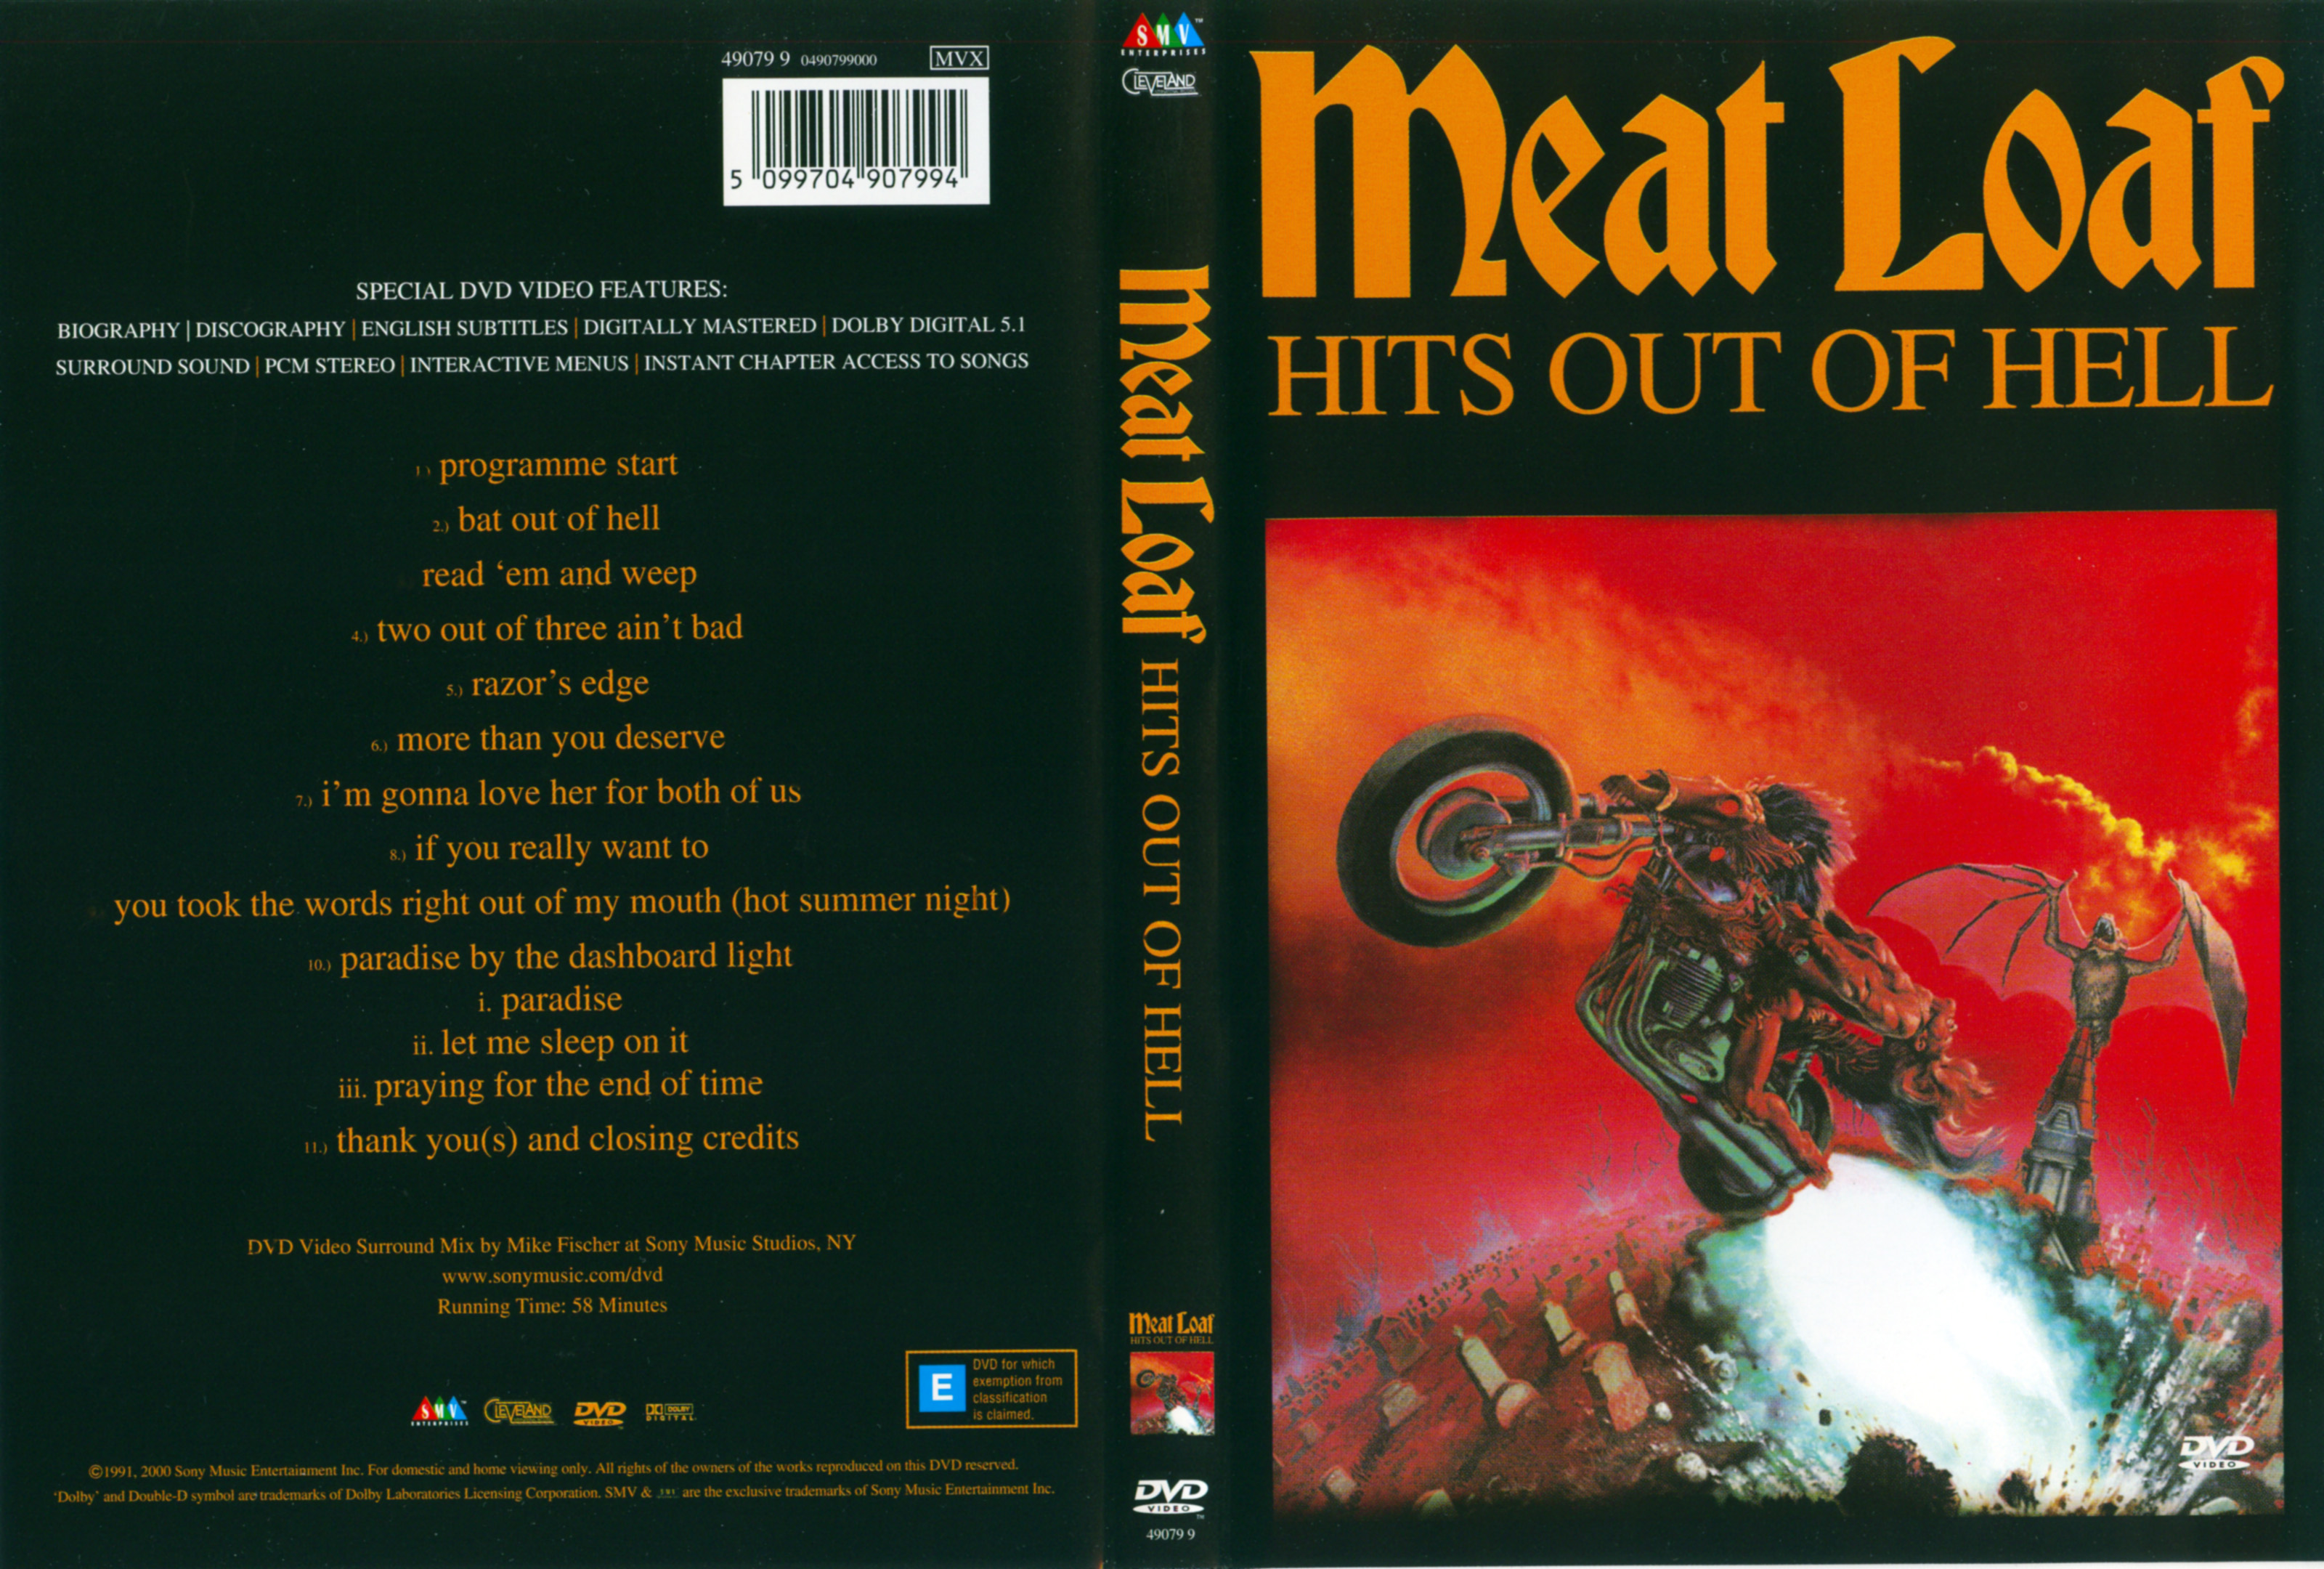 Jaquette DVD Meat Loaf - Hits out of hell